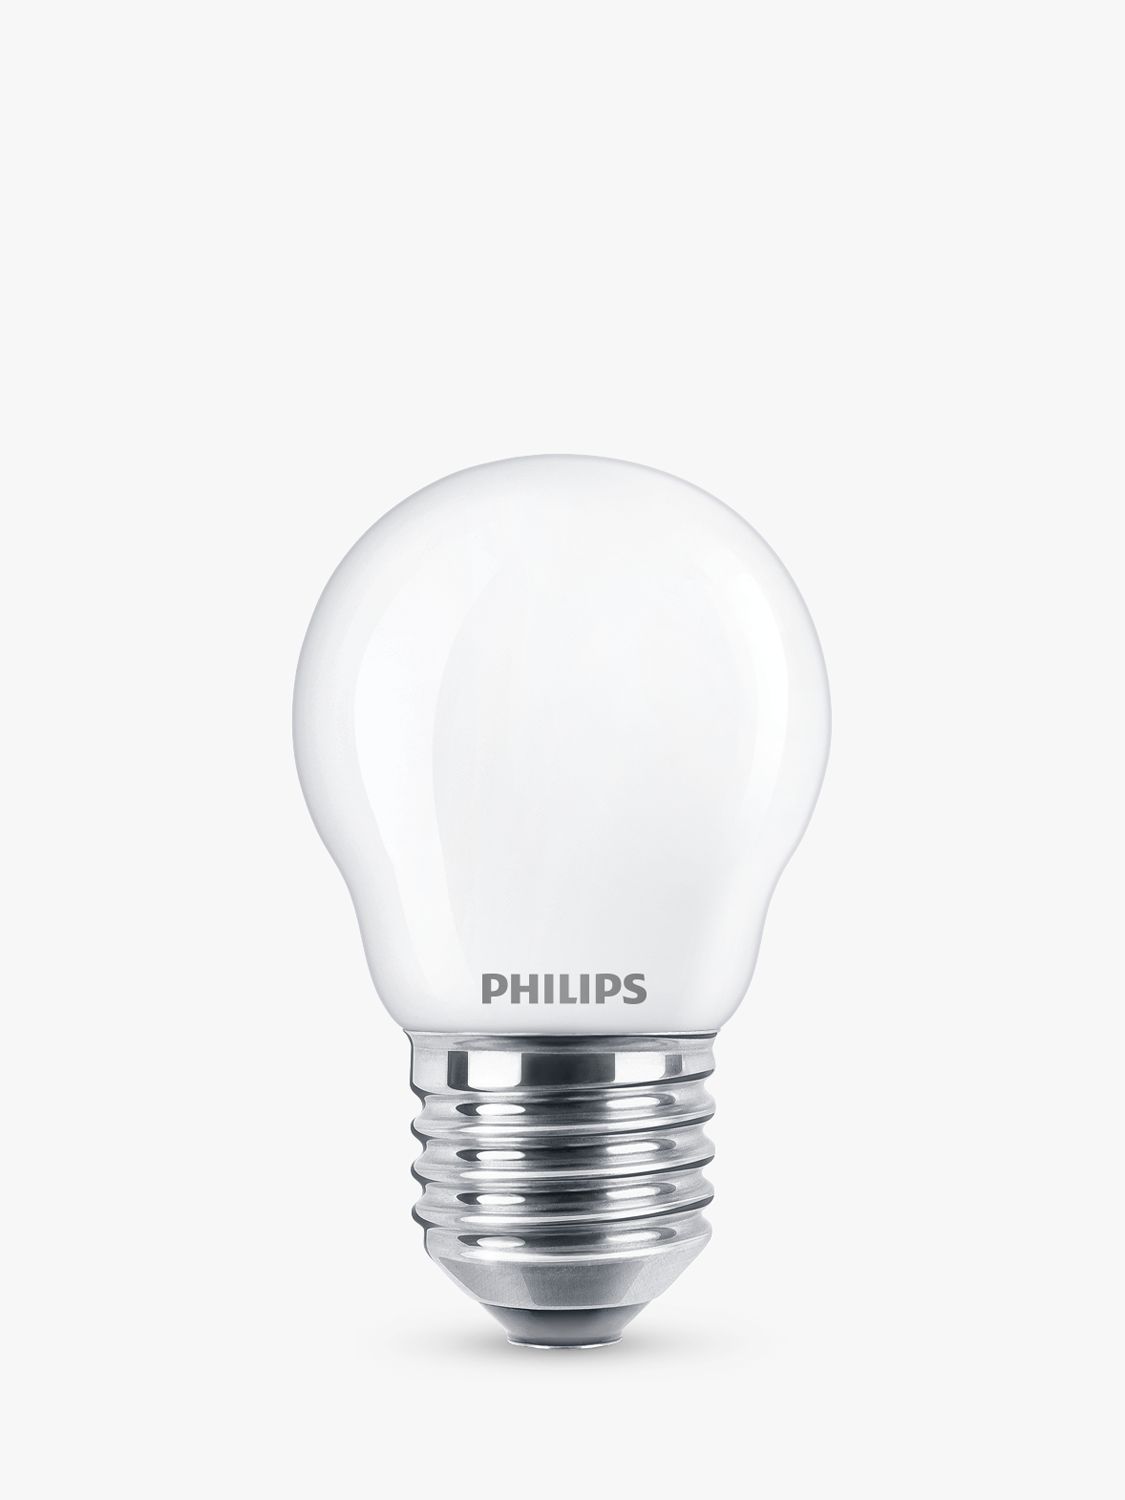 Photo of Philips 6.5w e27 led non dimmable classic bulb warm white